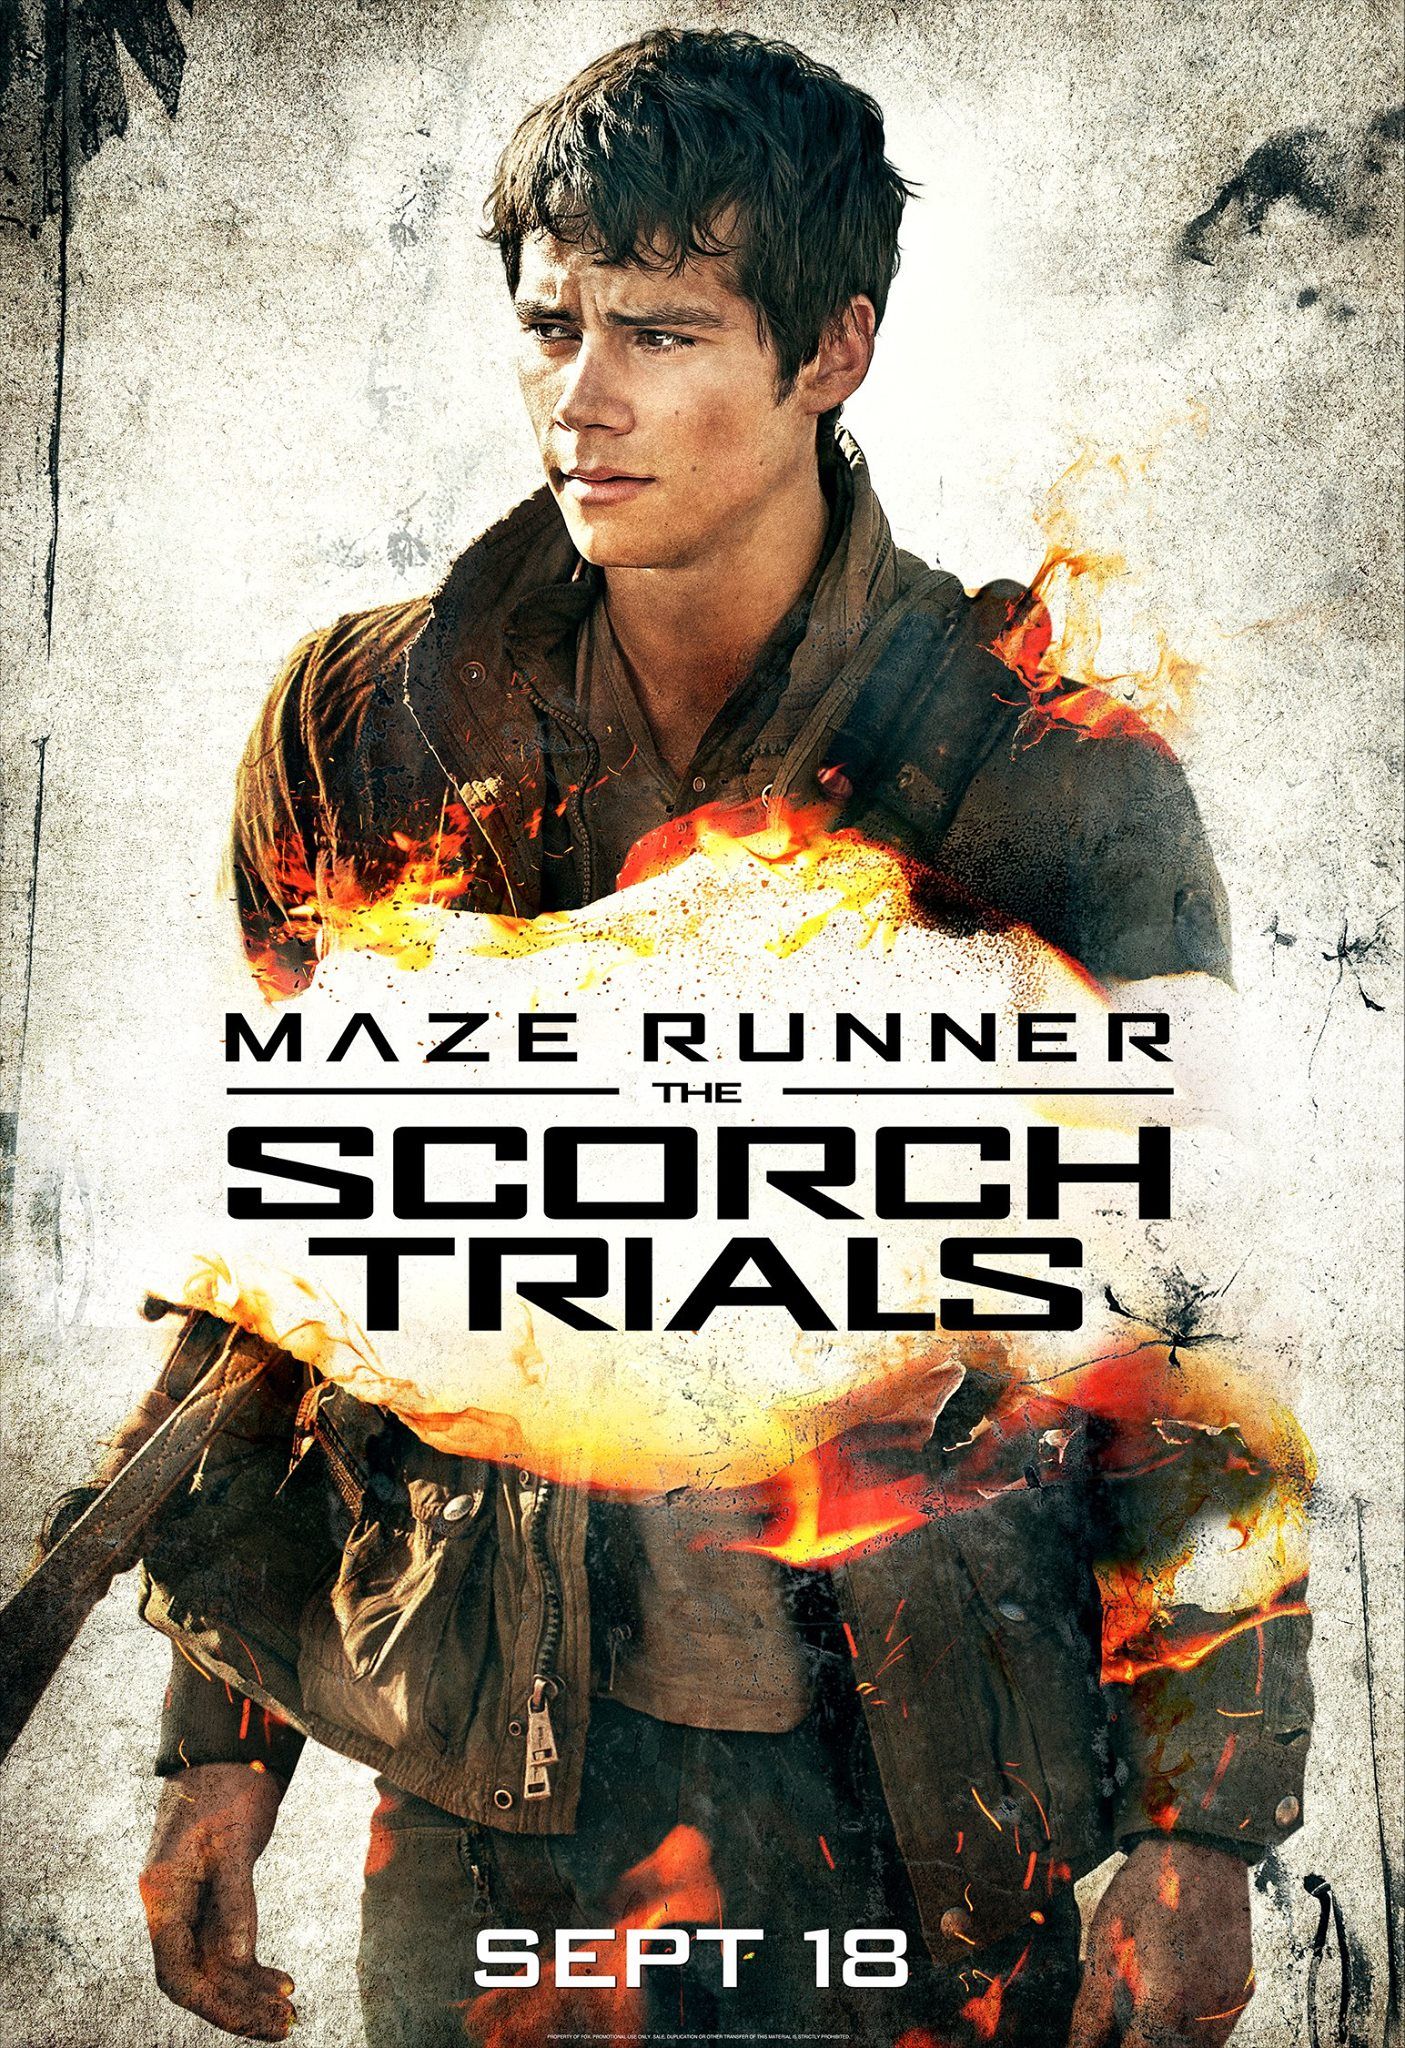 thomas, maze runner 2 and le labyrinthe 2 - image #3665168 on